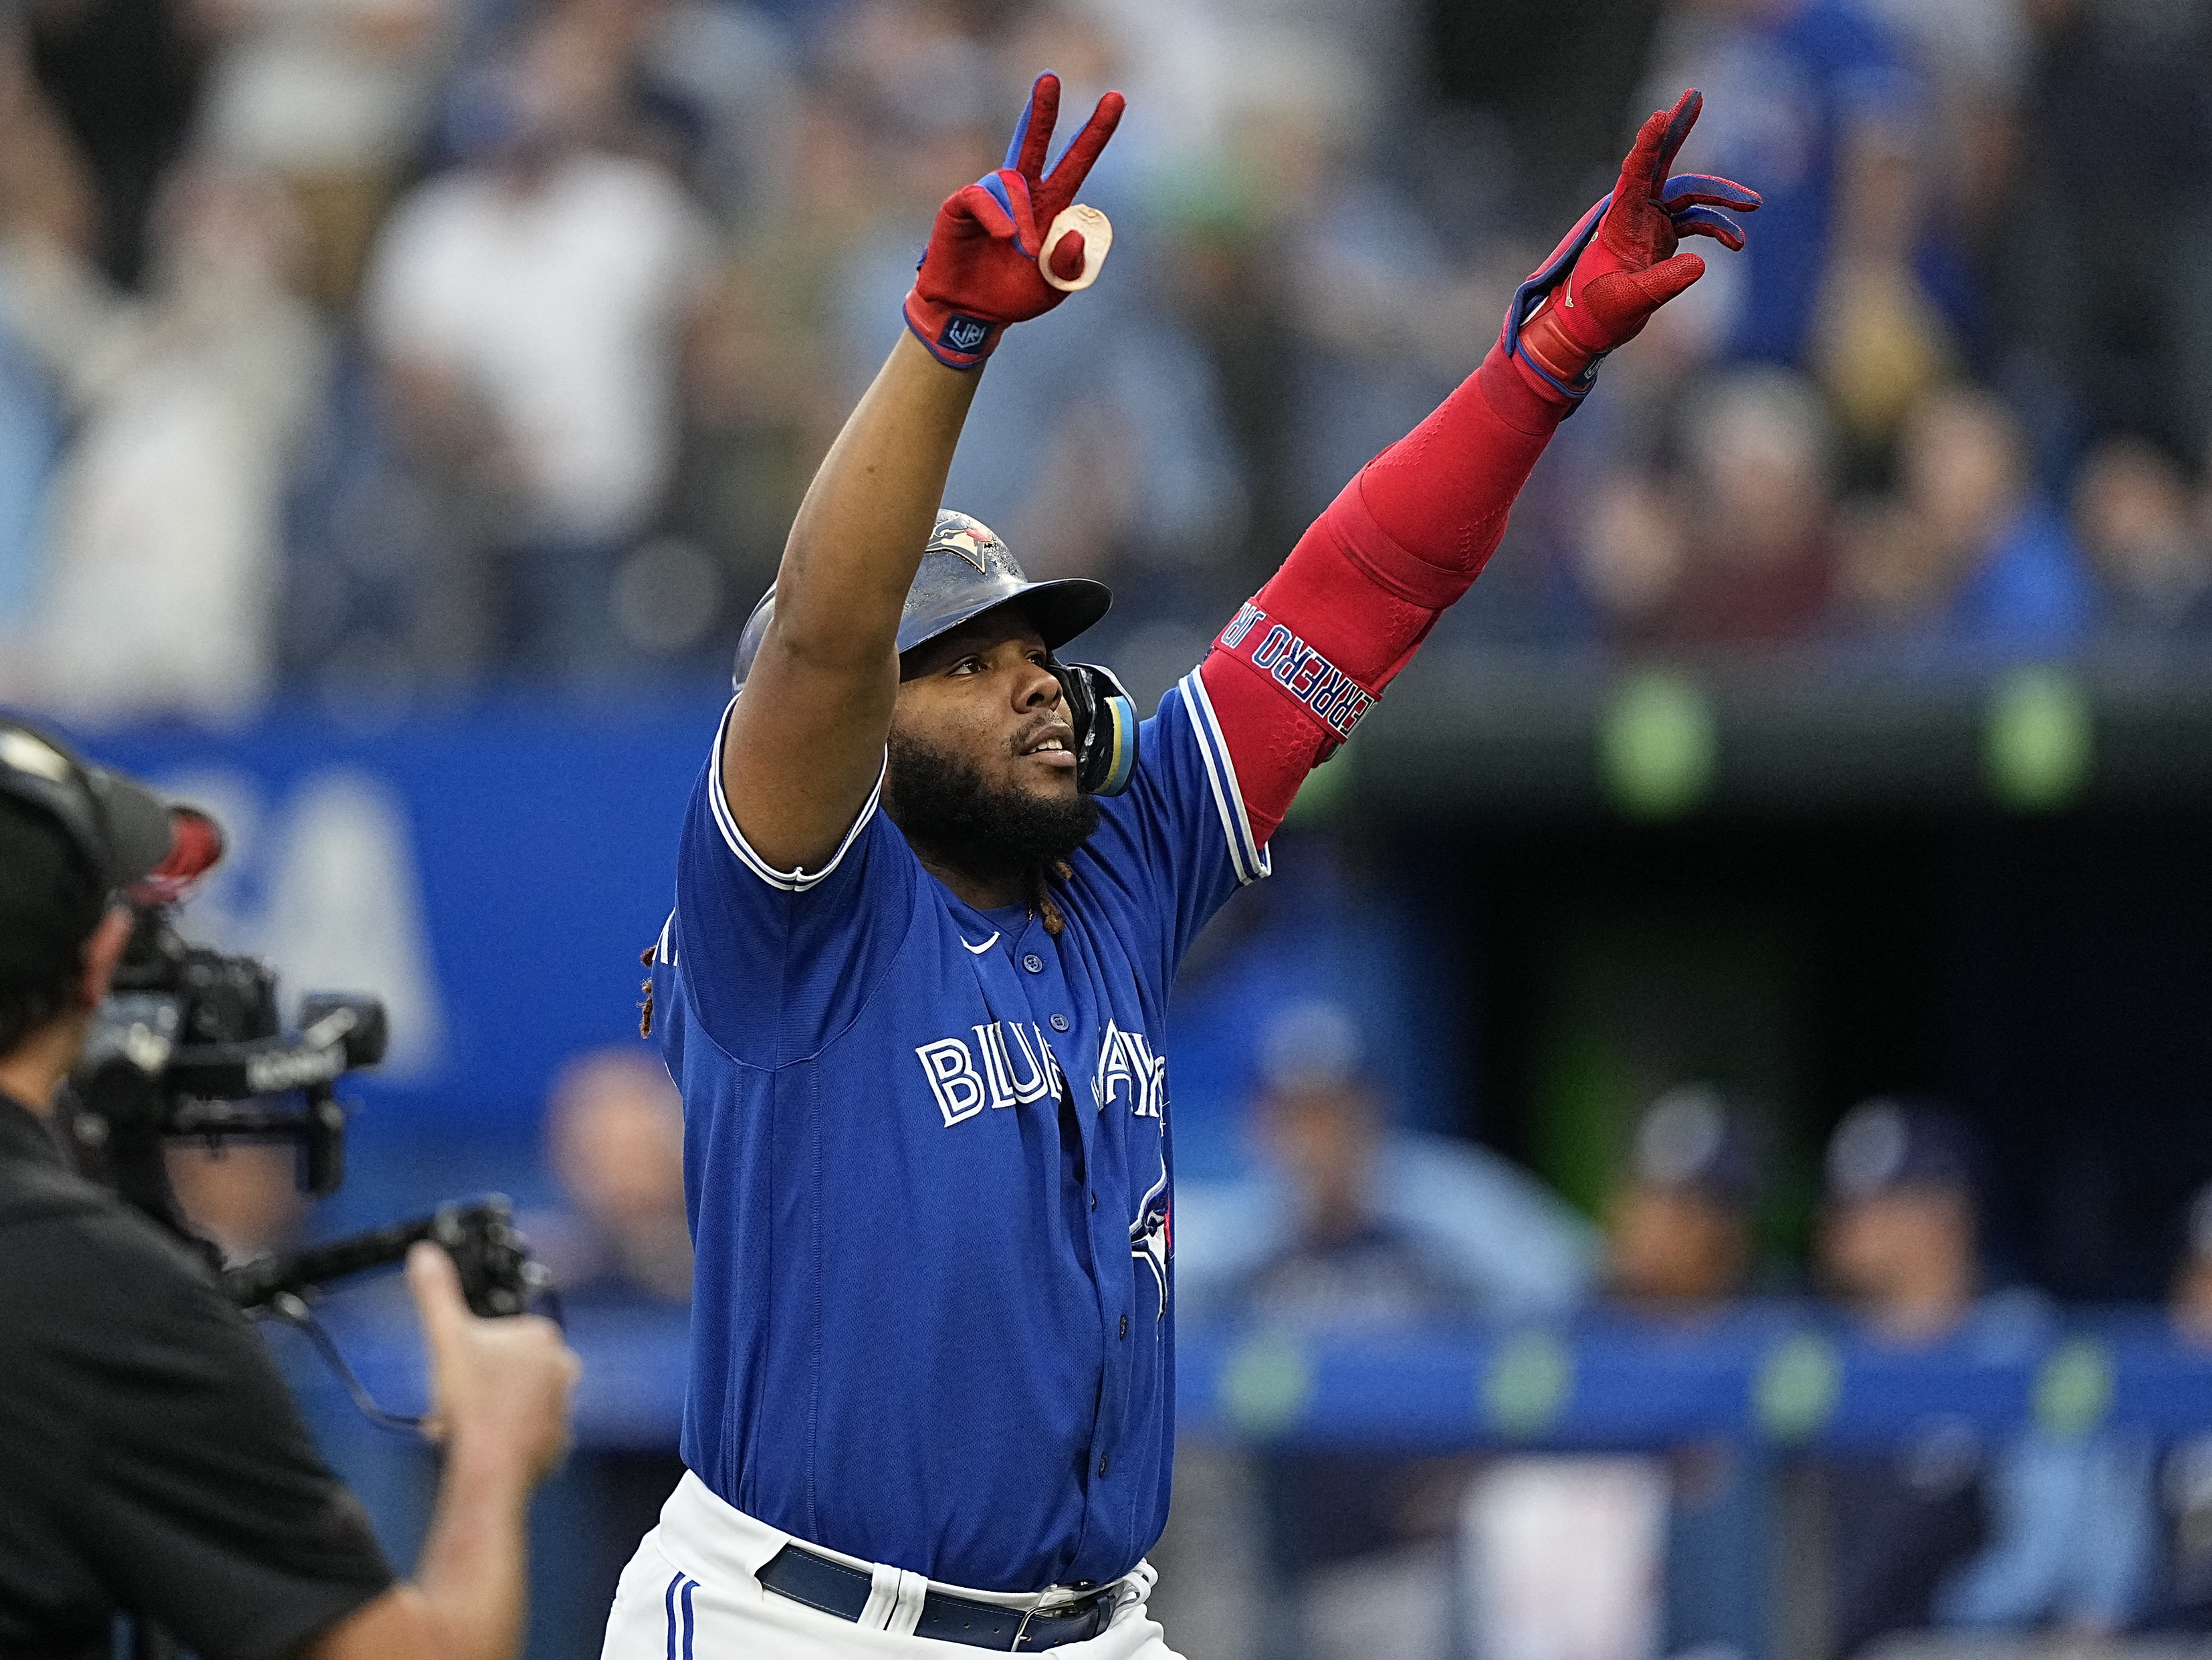 Vladimir Guerrero Jr. hits 100th HR, will give milestone ball to dad